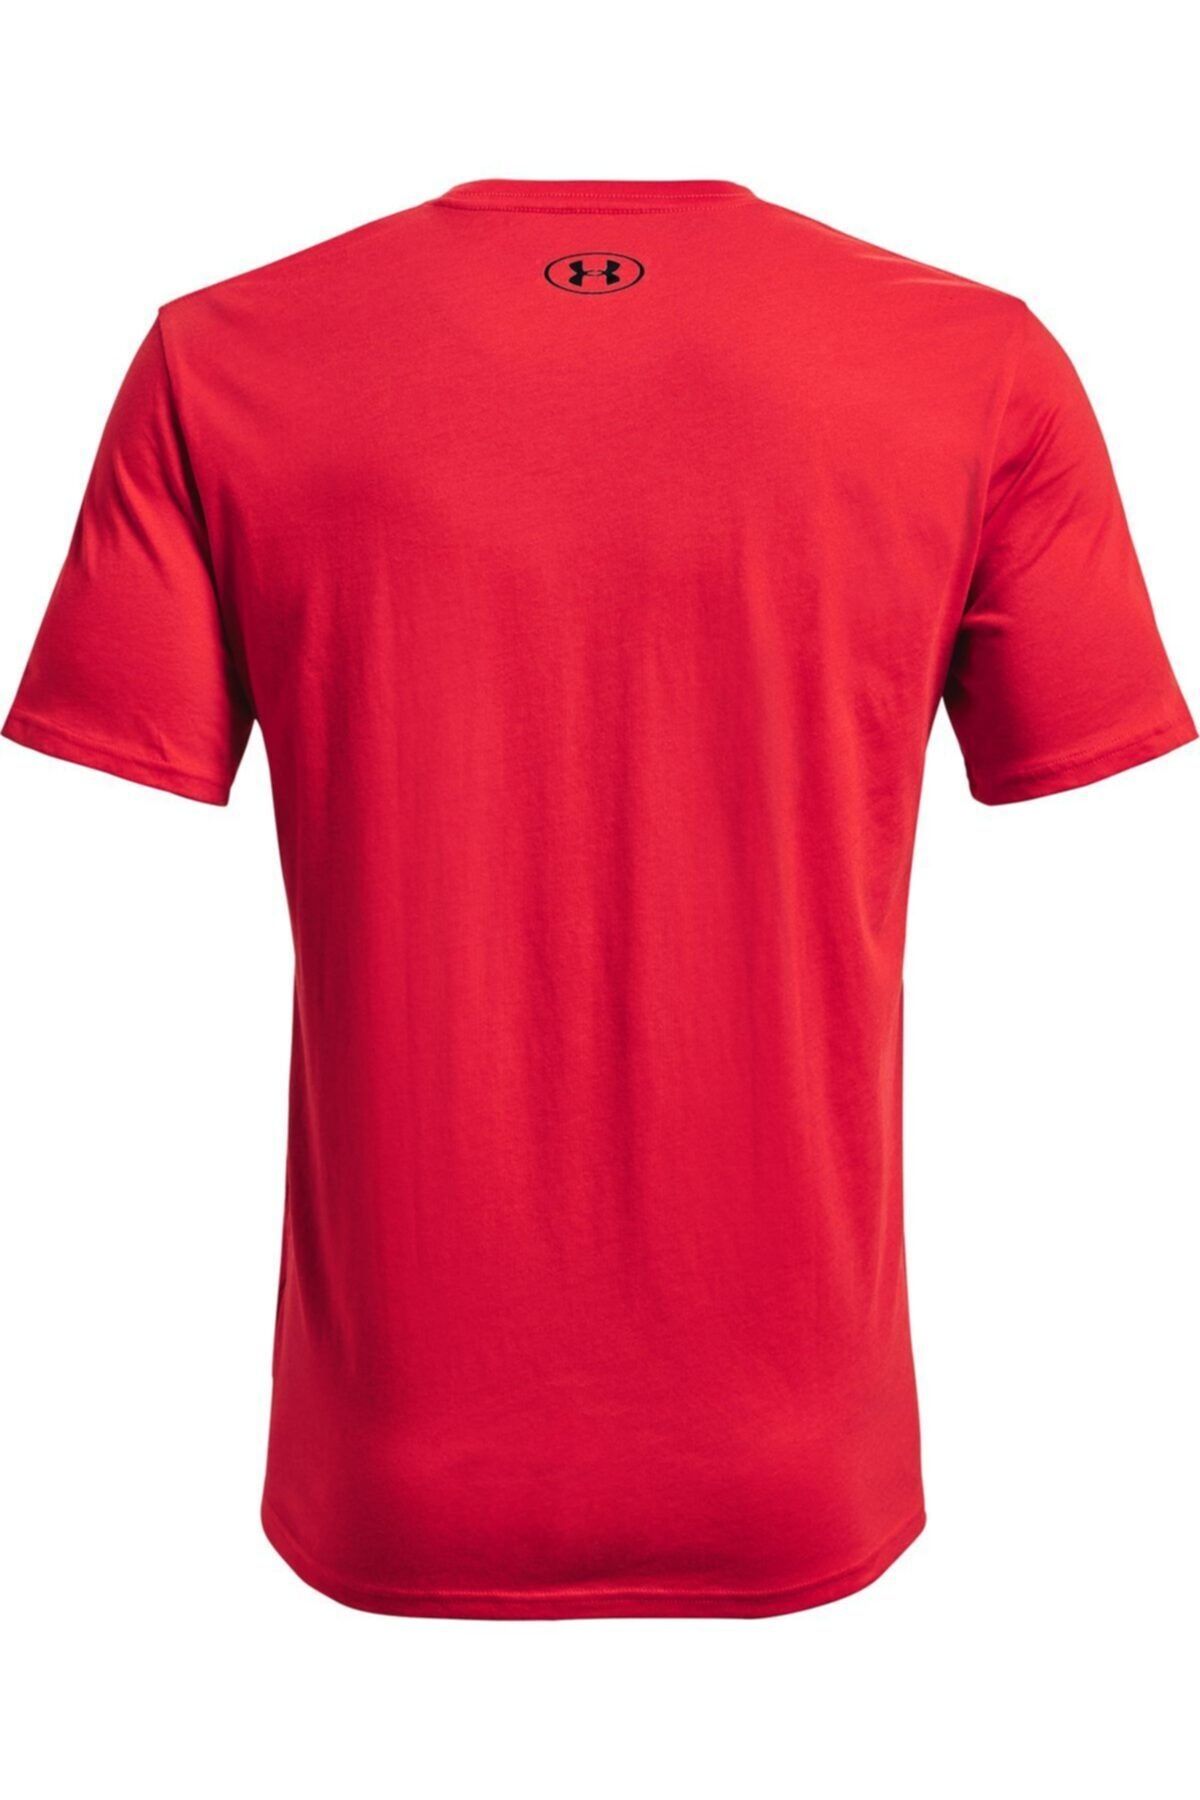 Under Armour Sportstyle LOGO SS 1329590